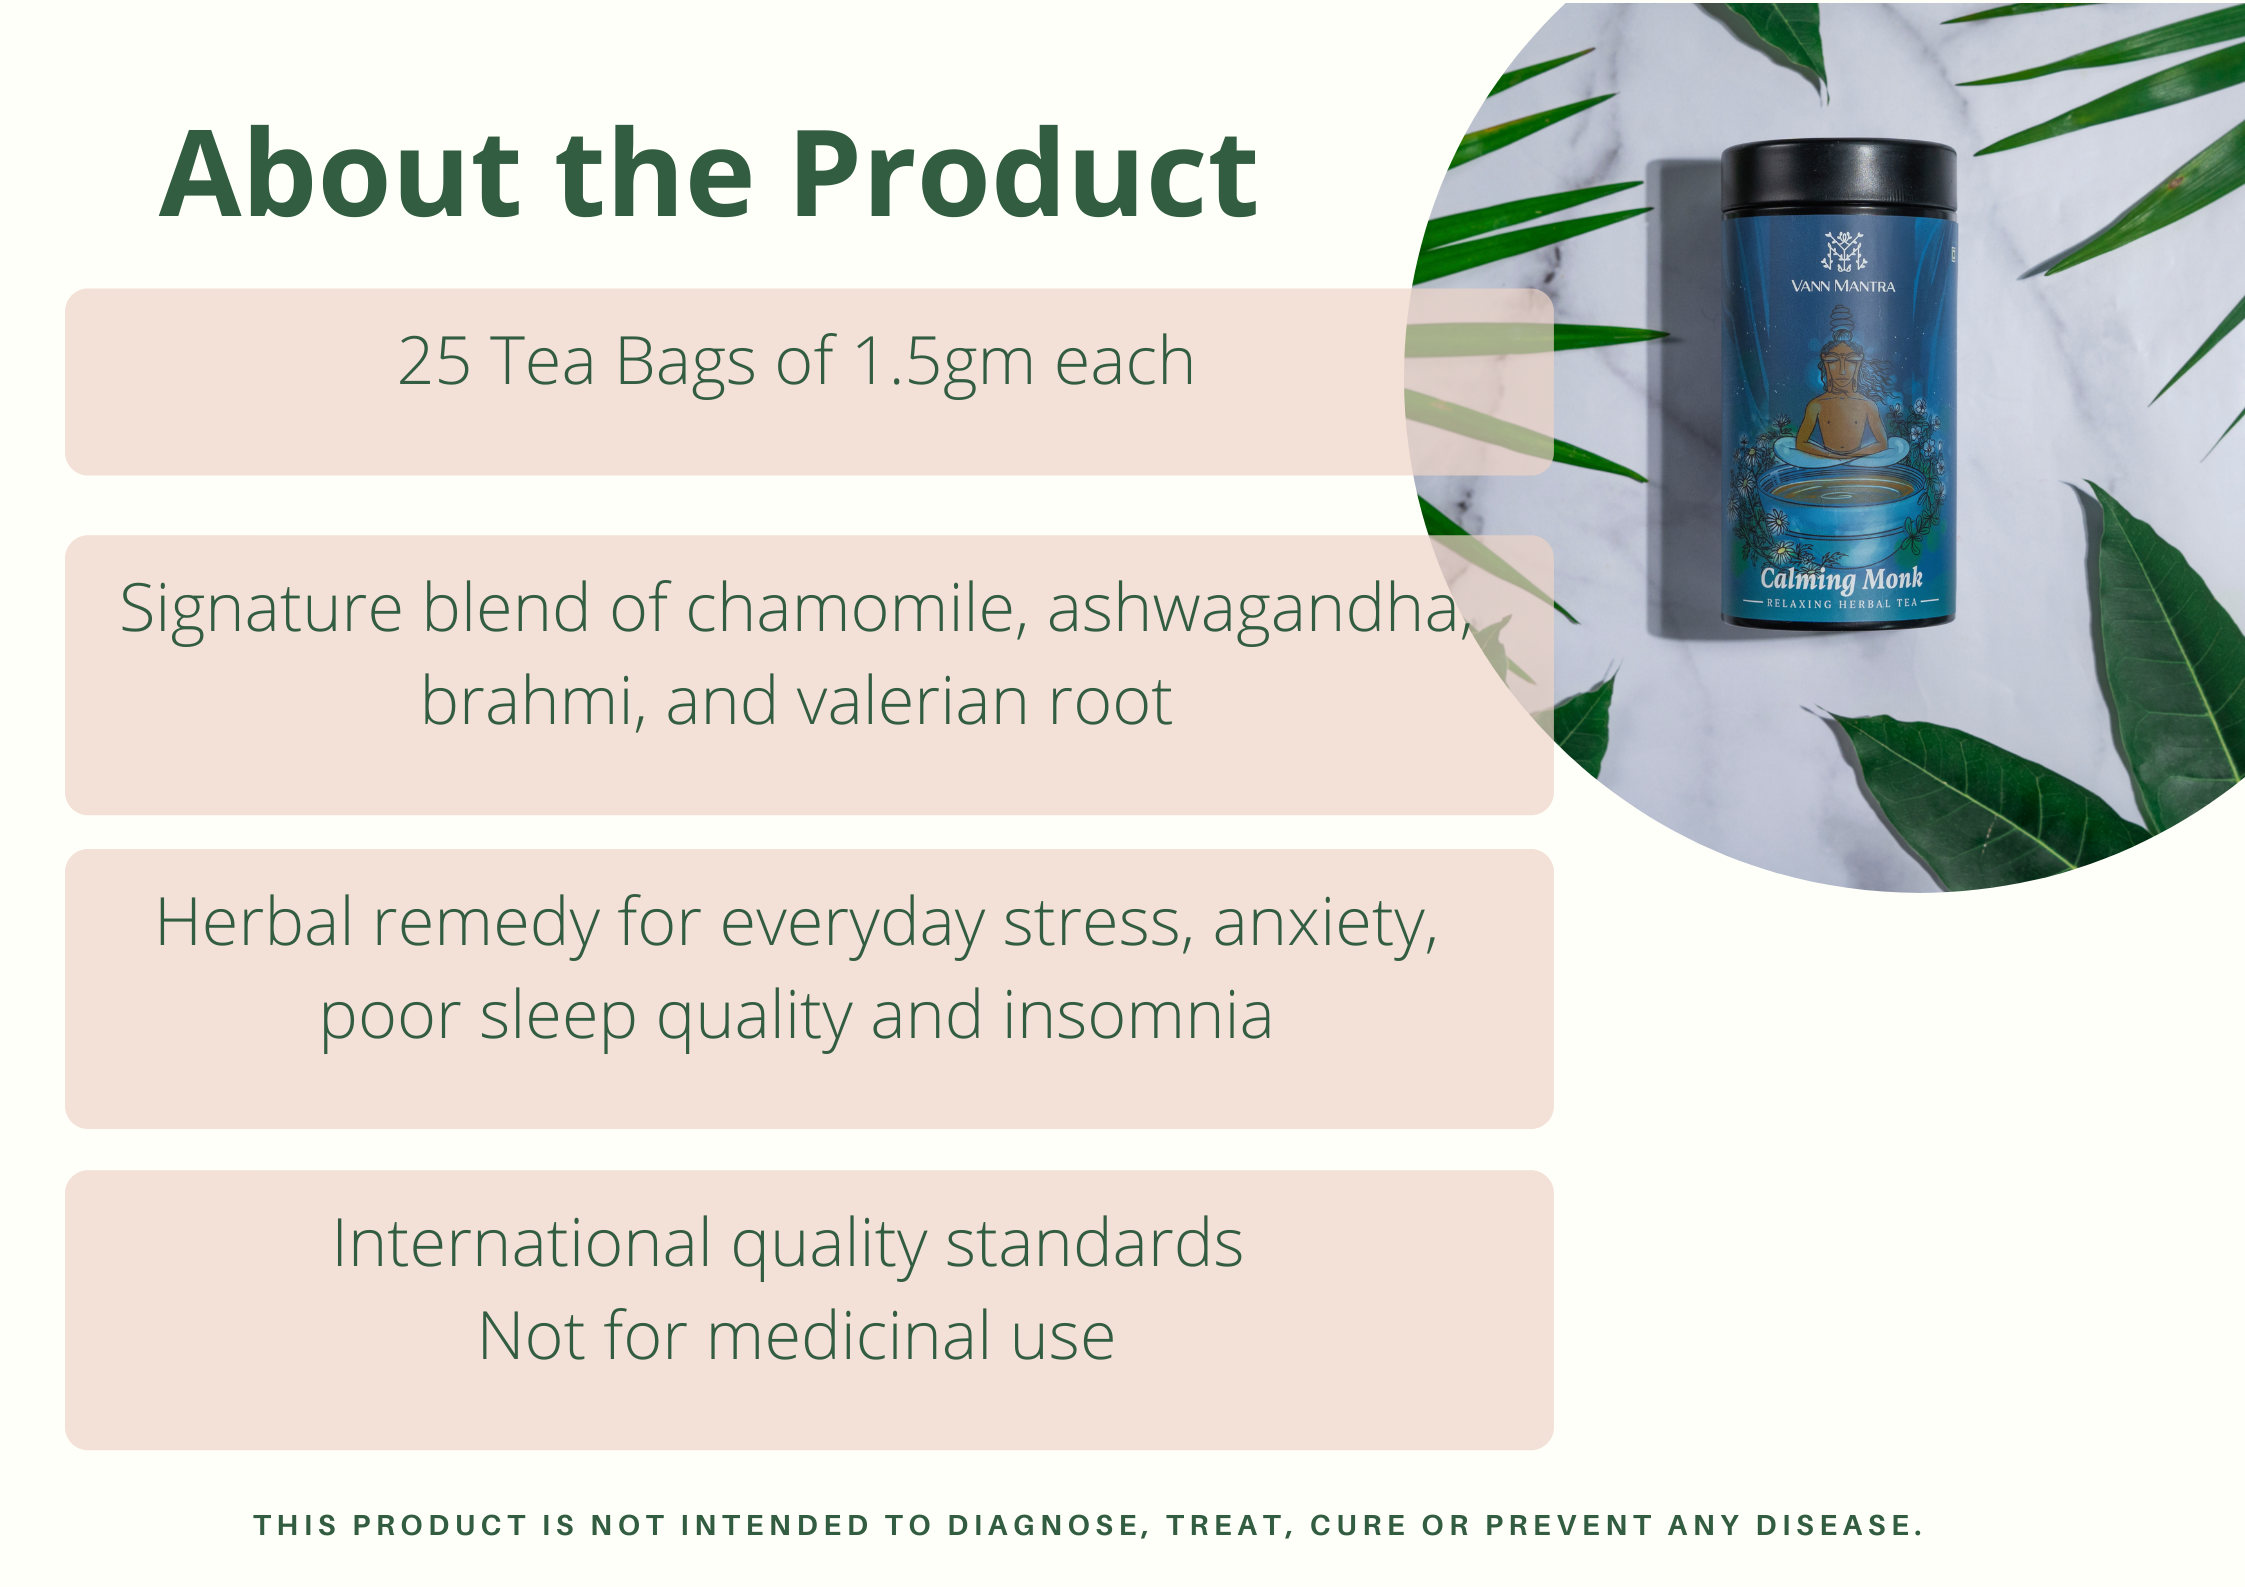 Infographic explaining the features and benefits of Calming Monk Tea. 